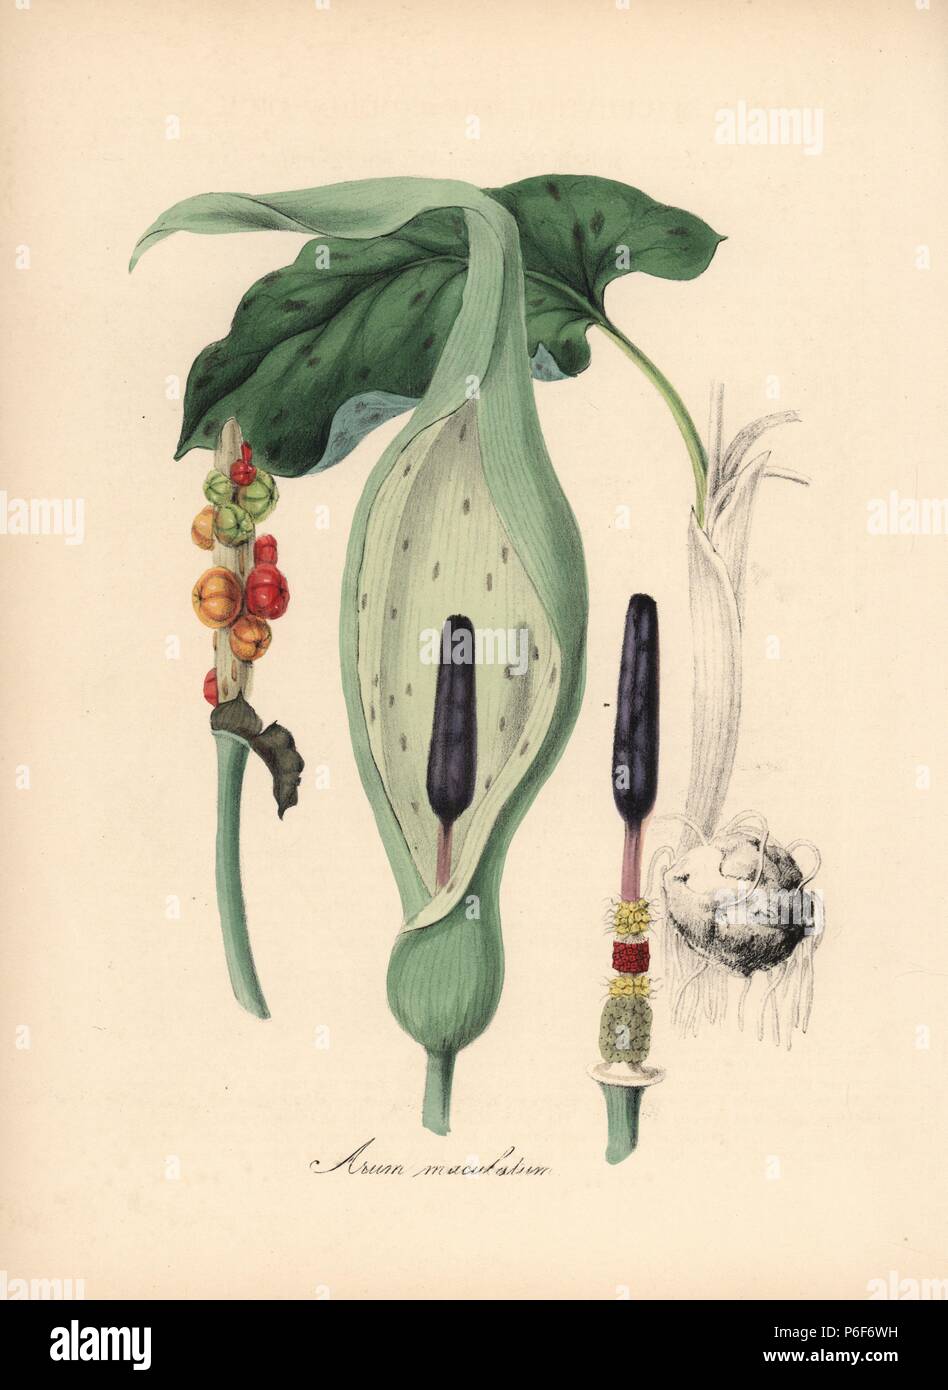 Cuckoopint, Arum maculatum. Handcoloured zincograph by C. Chabot drawn by Miss M. A. Burnett from her 'Plantae Utiliores: or Illustrations of Useful Plants,' Whittaker, London, 1842. Miss Burnett drew the botanical illustrations, but the text was chiefly by her late brother, British botanist Gilbert Thomas Burnett (1800-1835). Stock Photo